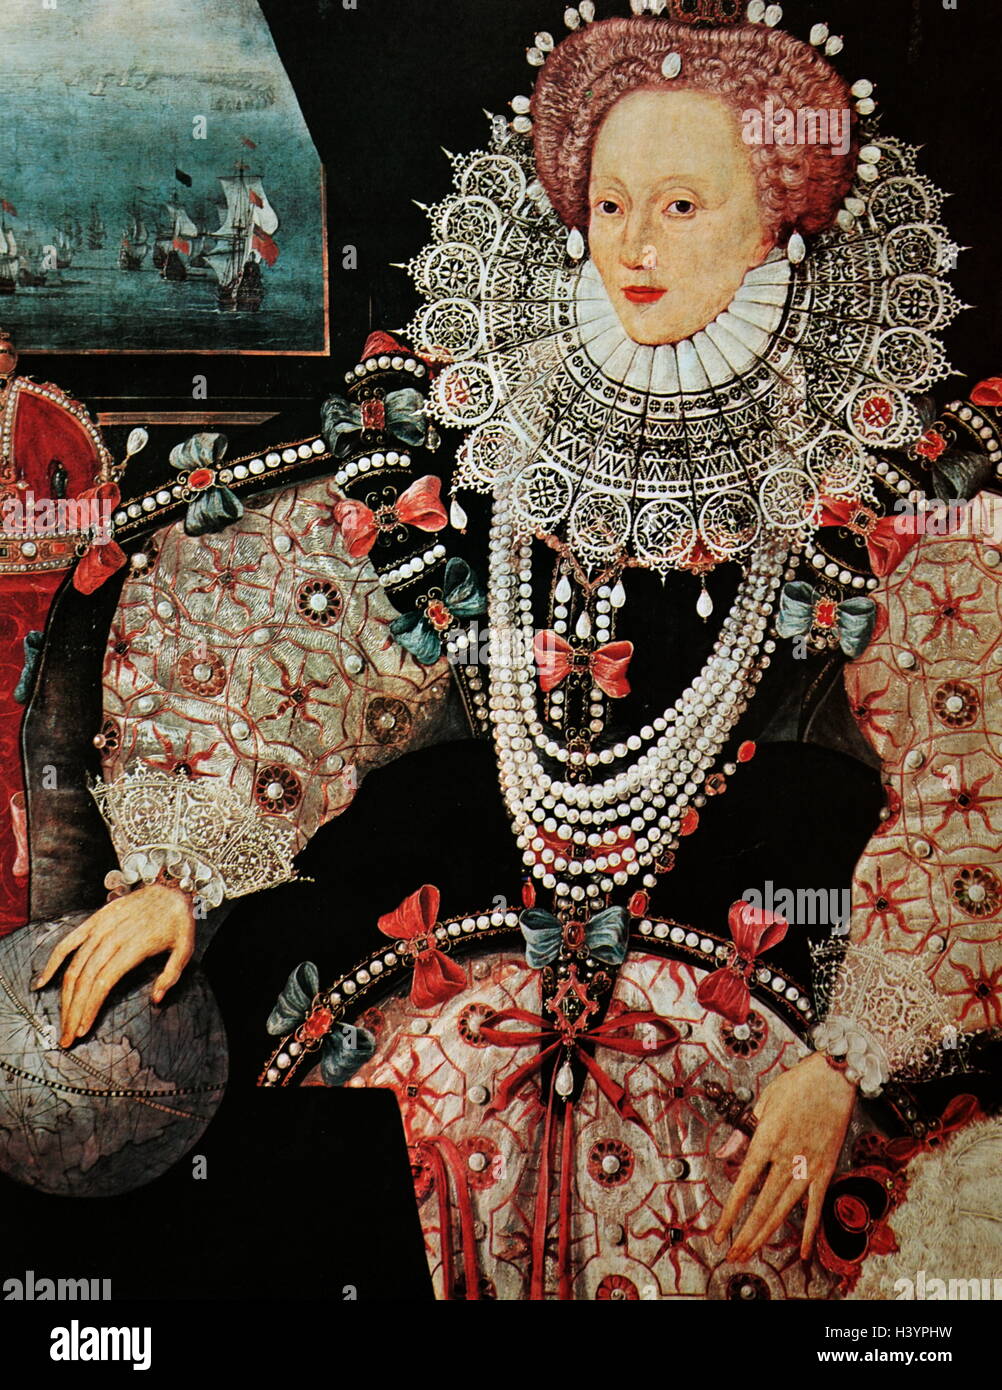 The Armada Portrait of Elizabeth I of England (1533-1603) was Queen of  England and Ireland. The Armada Portrait is one of three surviving versions  of an allegorical panel painting depicting the Tudor